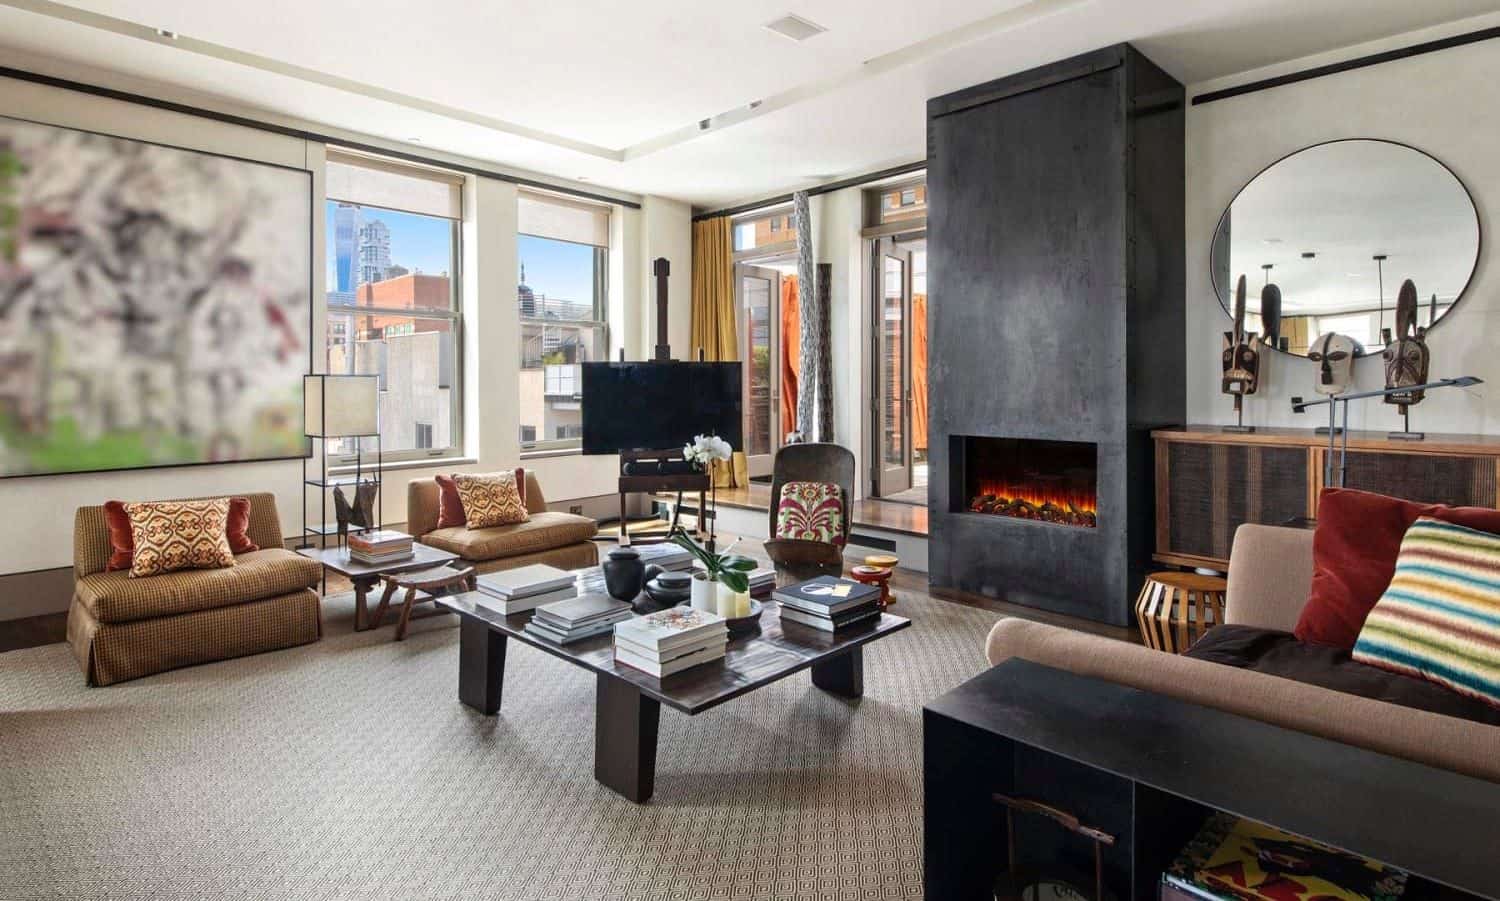 Cozy, stylish fireplace area inside David Bowie's recently-sold Manhattan apartment.